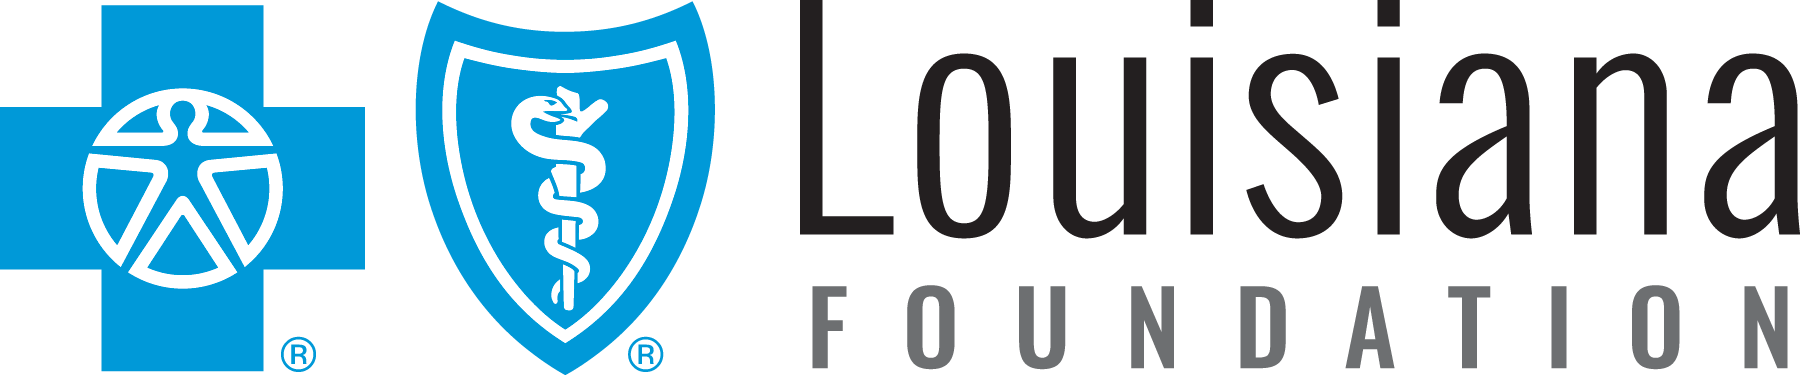 BC Foundation Logo transparency.png